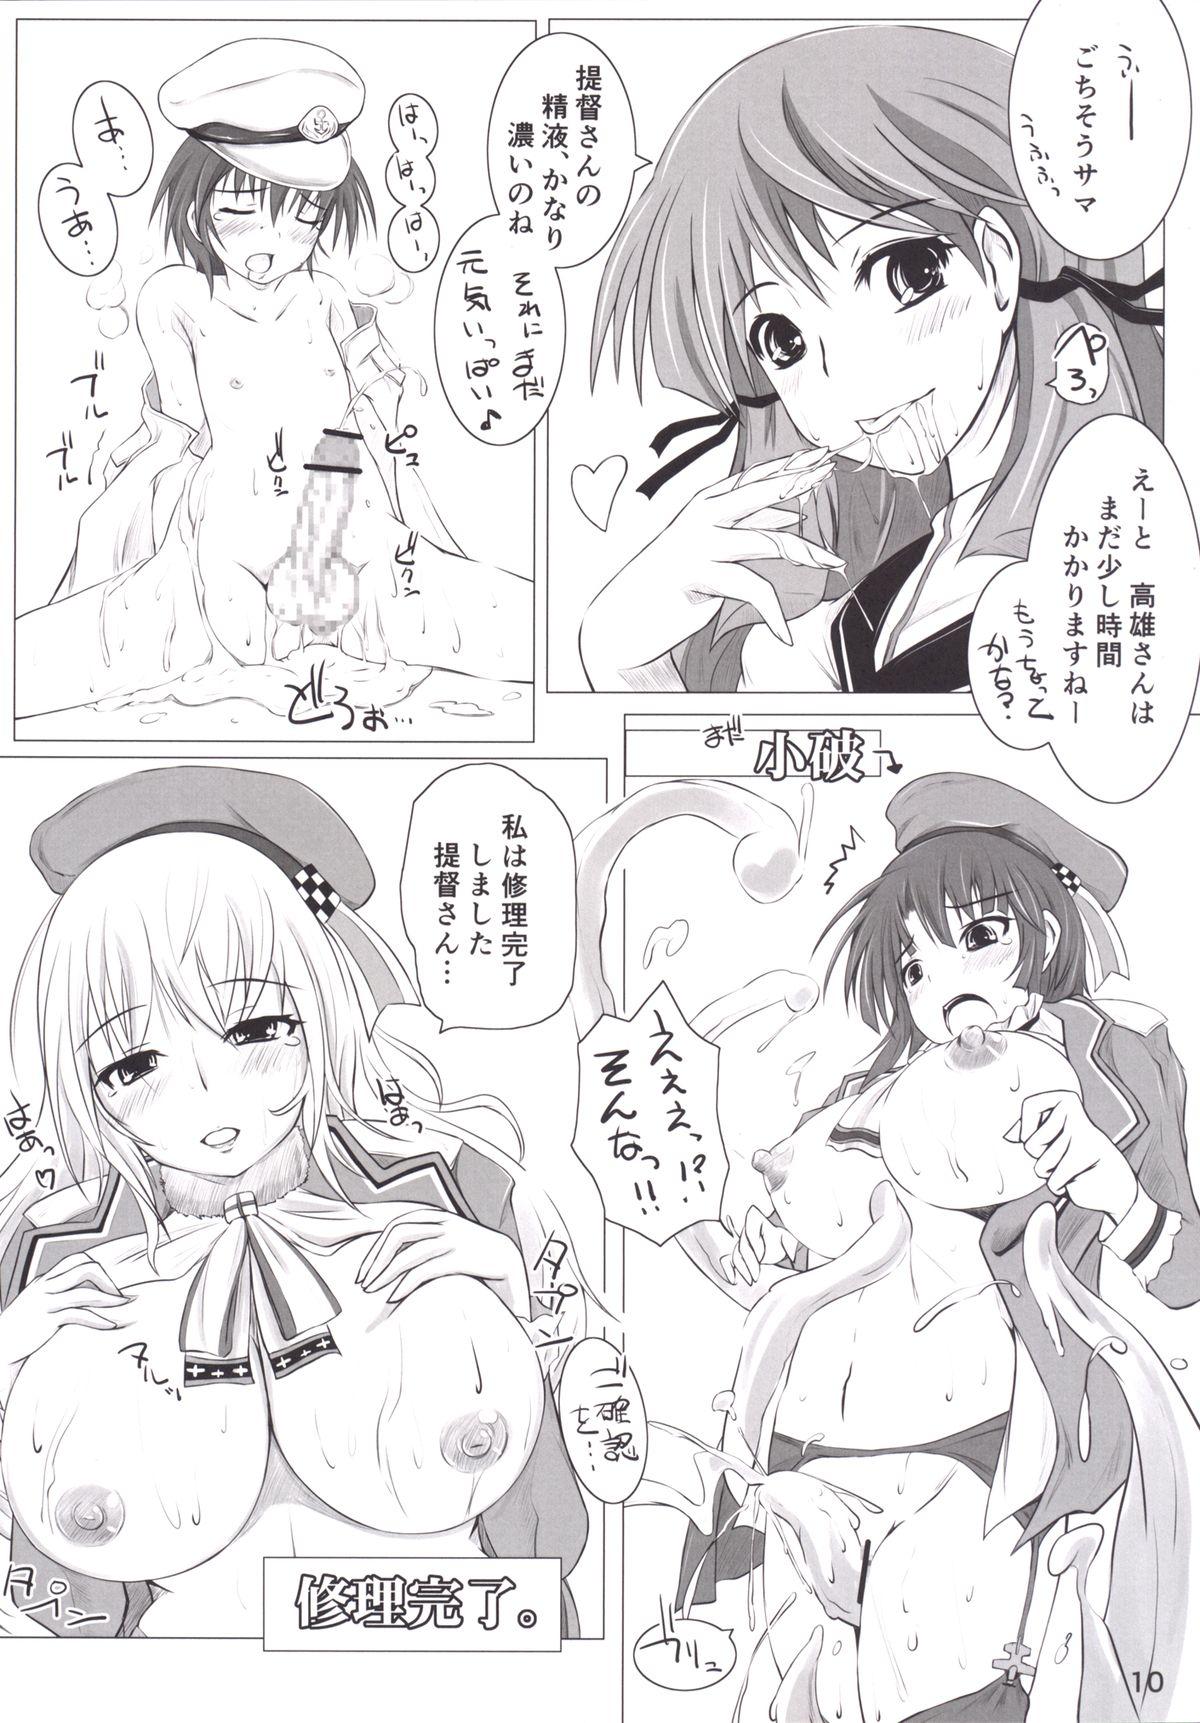 Perfect Butt Dock in Play! - Kantai collection Transsexual - Page 9